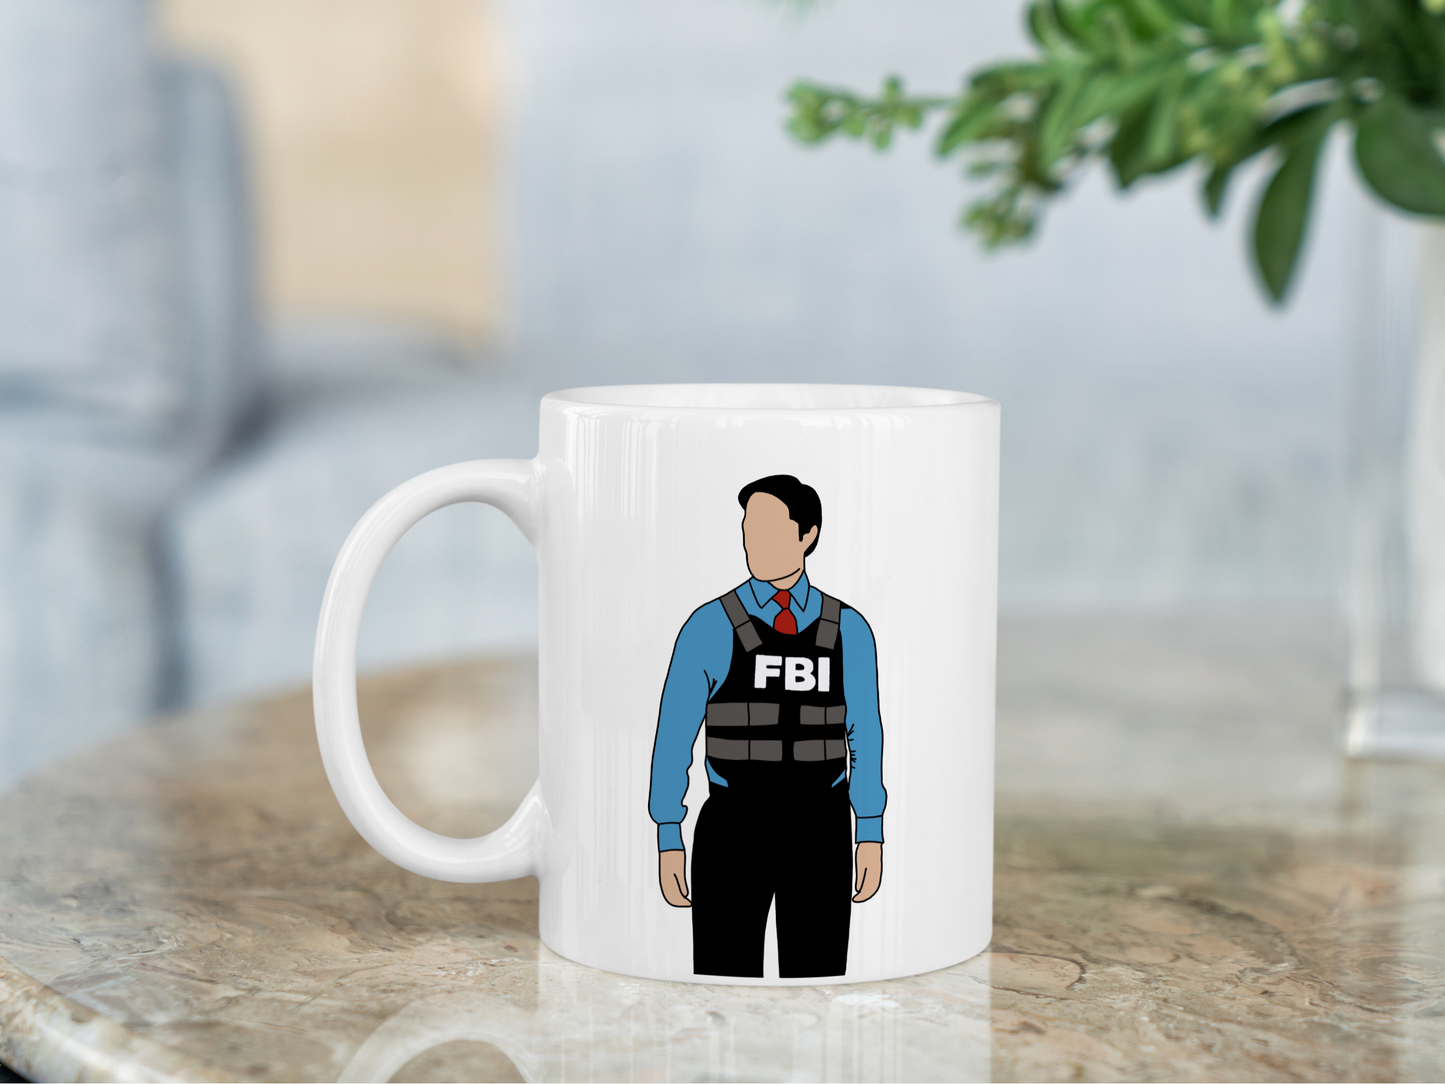 A white ceramic mug with a drawing of Aaron Hotchner from Criminal Minds on the front. This is a 10oz mug which is perfect for fans of Criminal Minds, particularly the character Aaron Hotchner. Made and sold by Krissi's Creations.